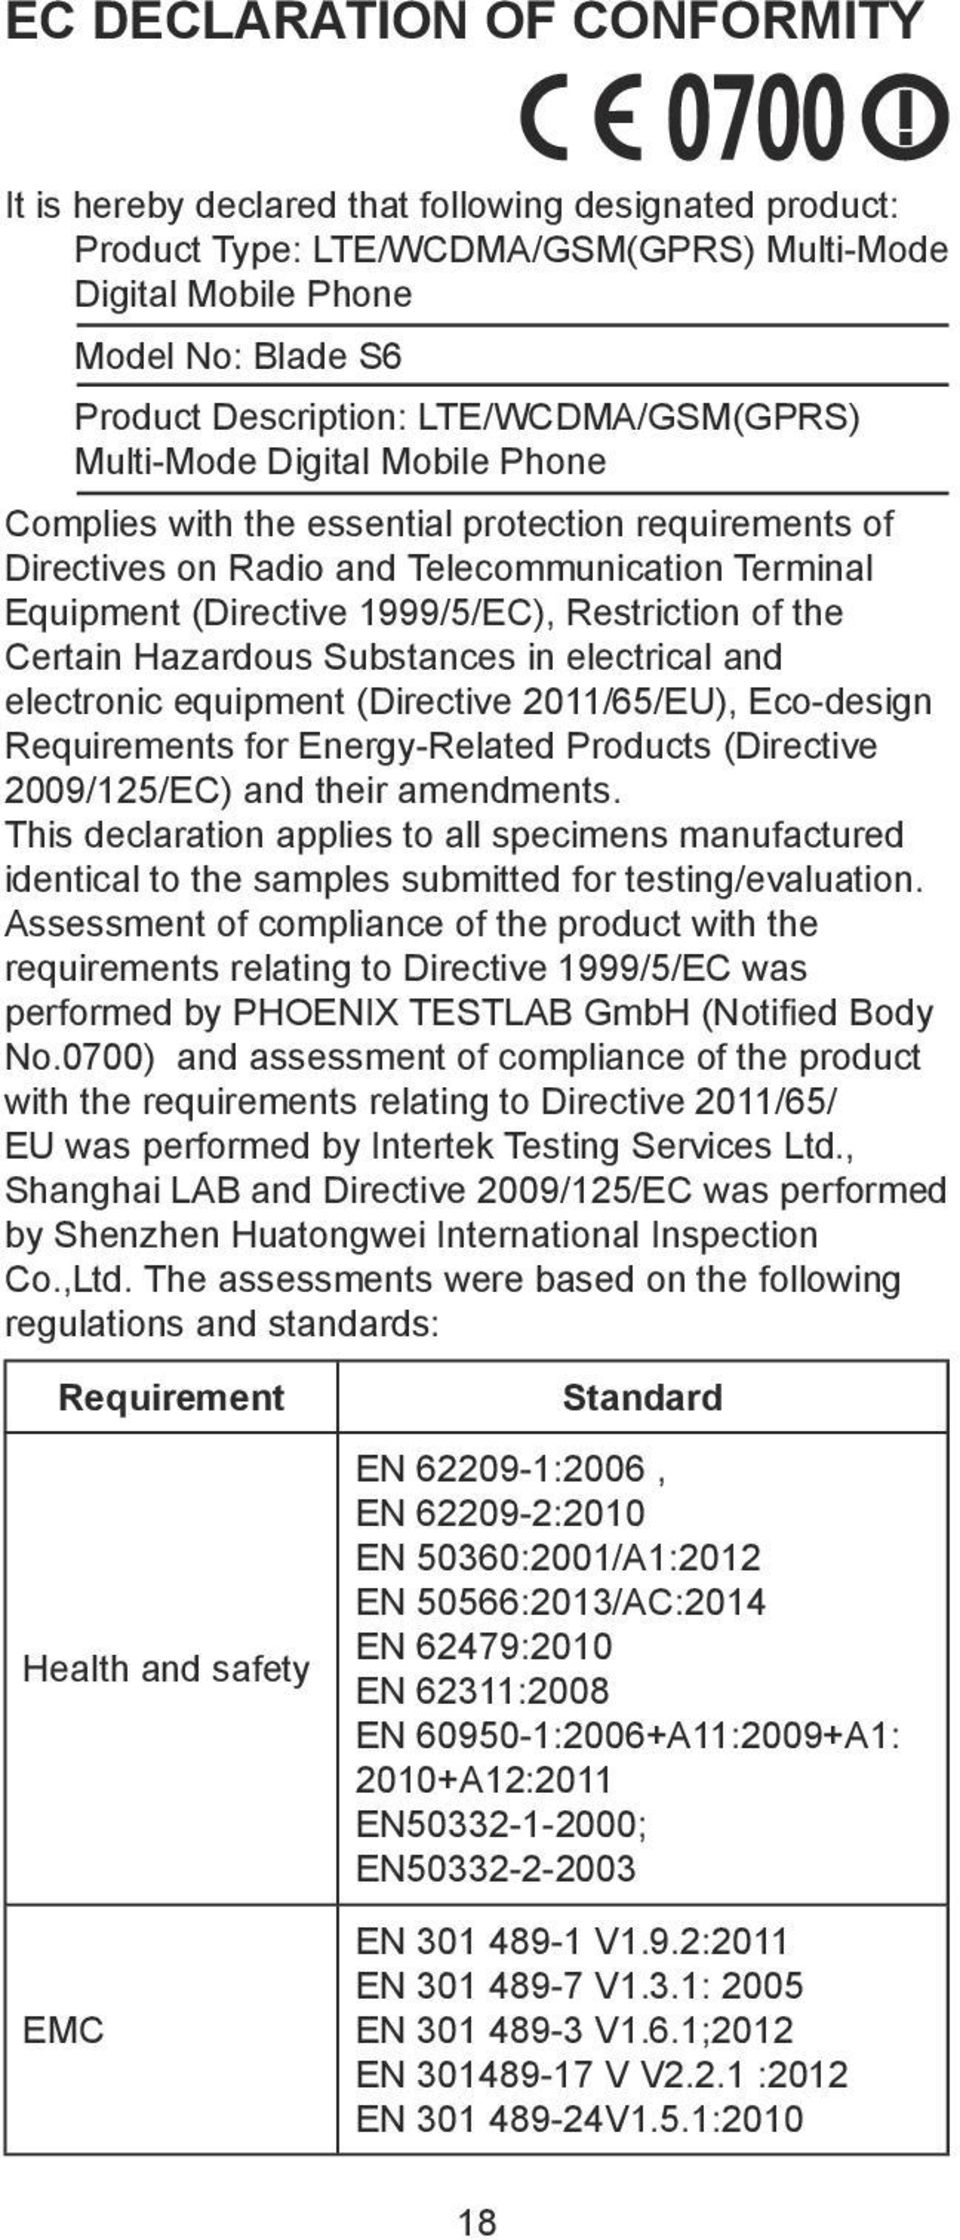 Restriction of the Certain Hazardous Substances in electrical and electronic equipment (Directive 2011/65/EU), Eco-design Requirements for Energy-Related Products (Directive 2009/125/EC) and their